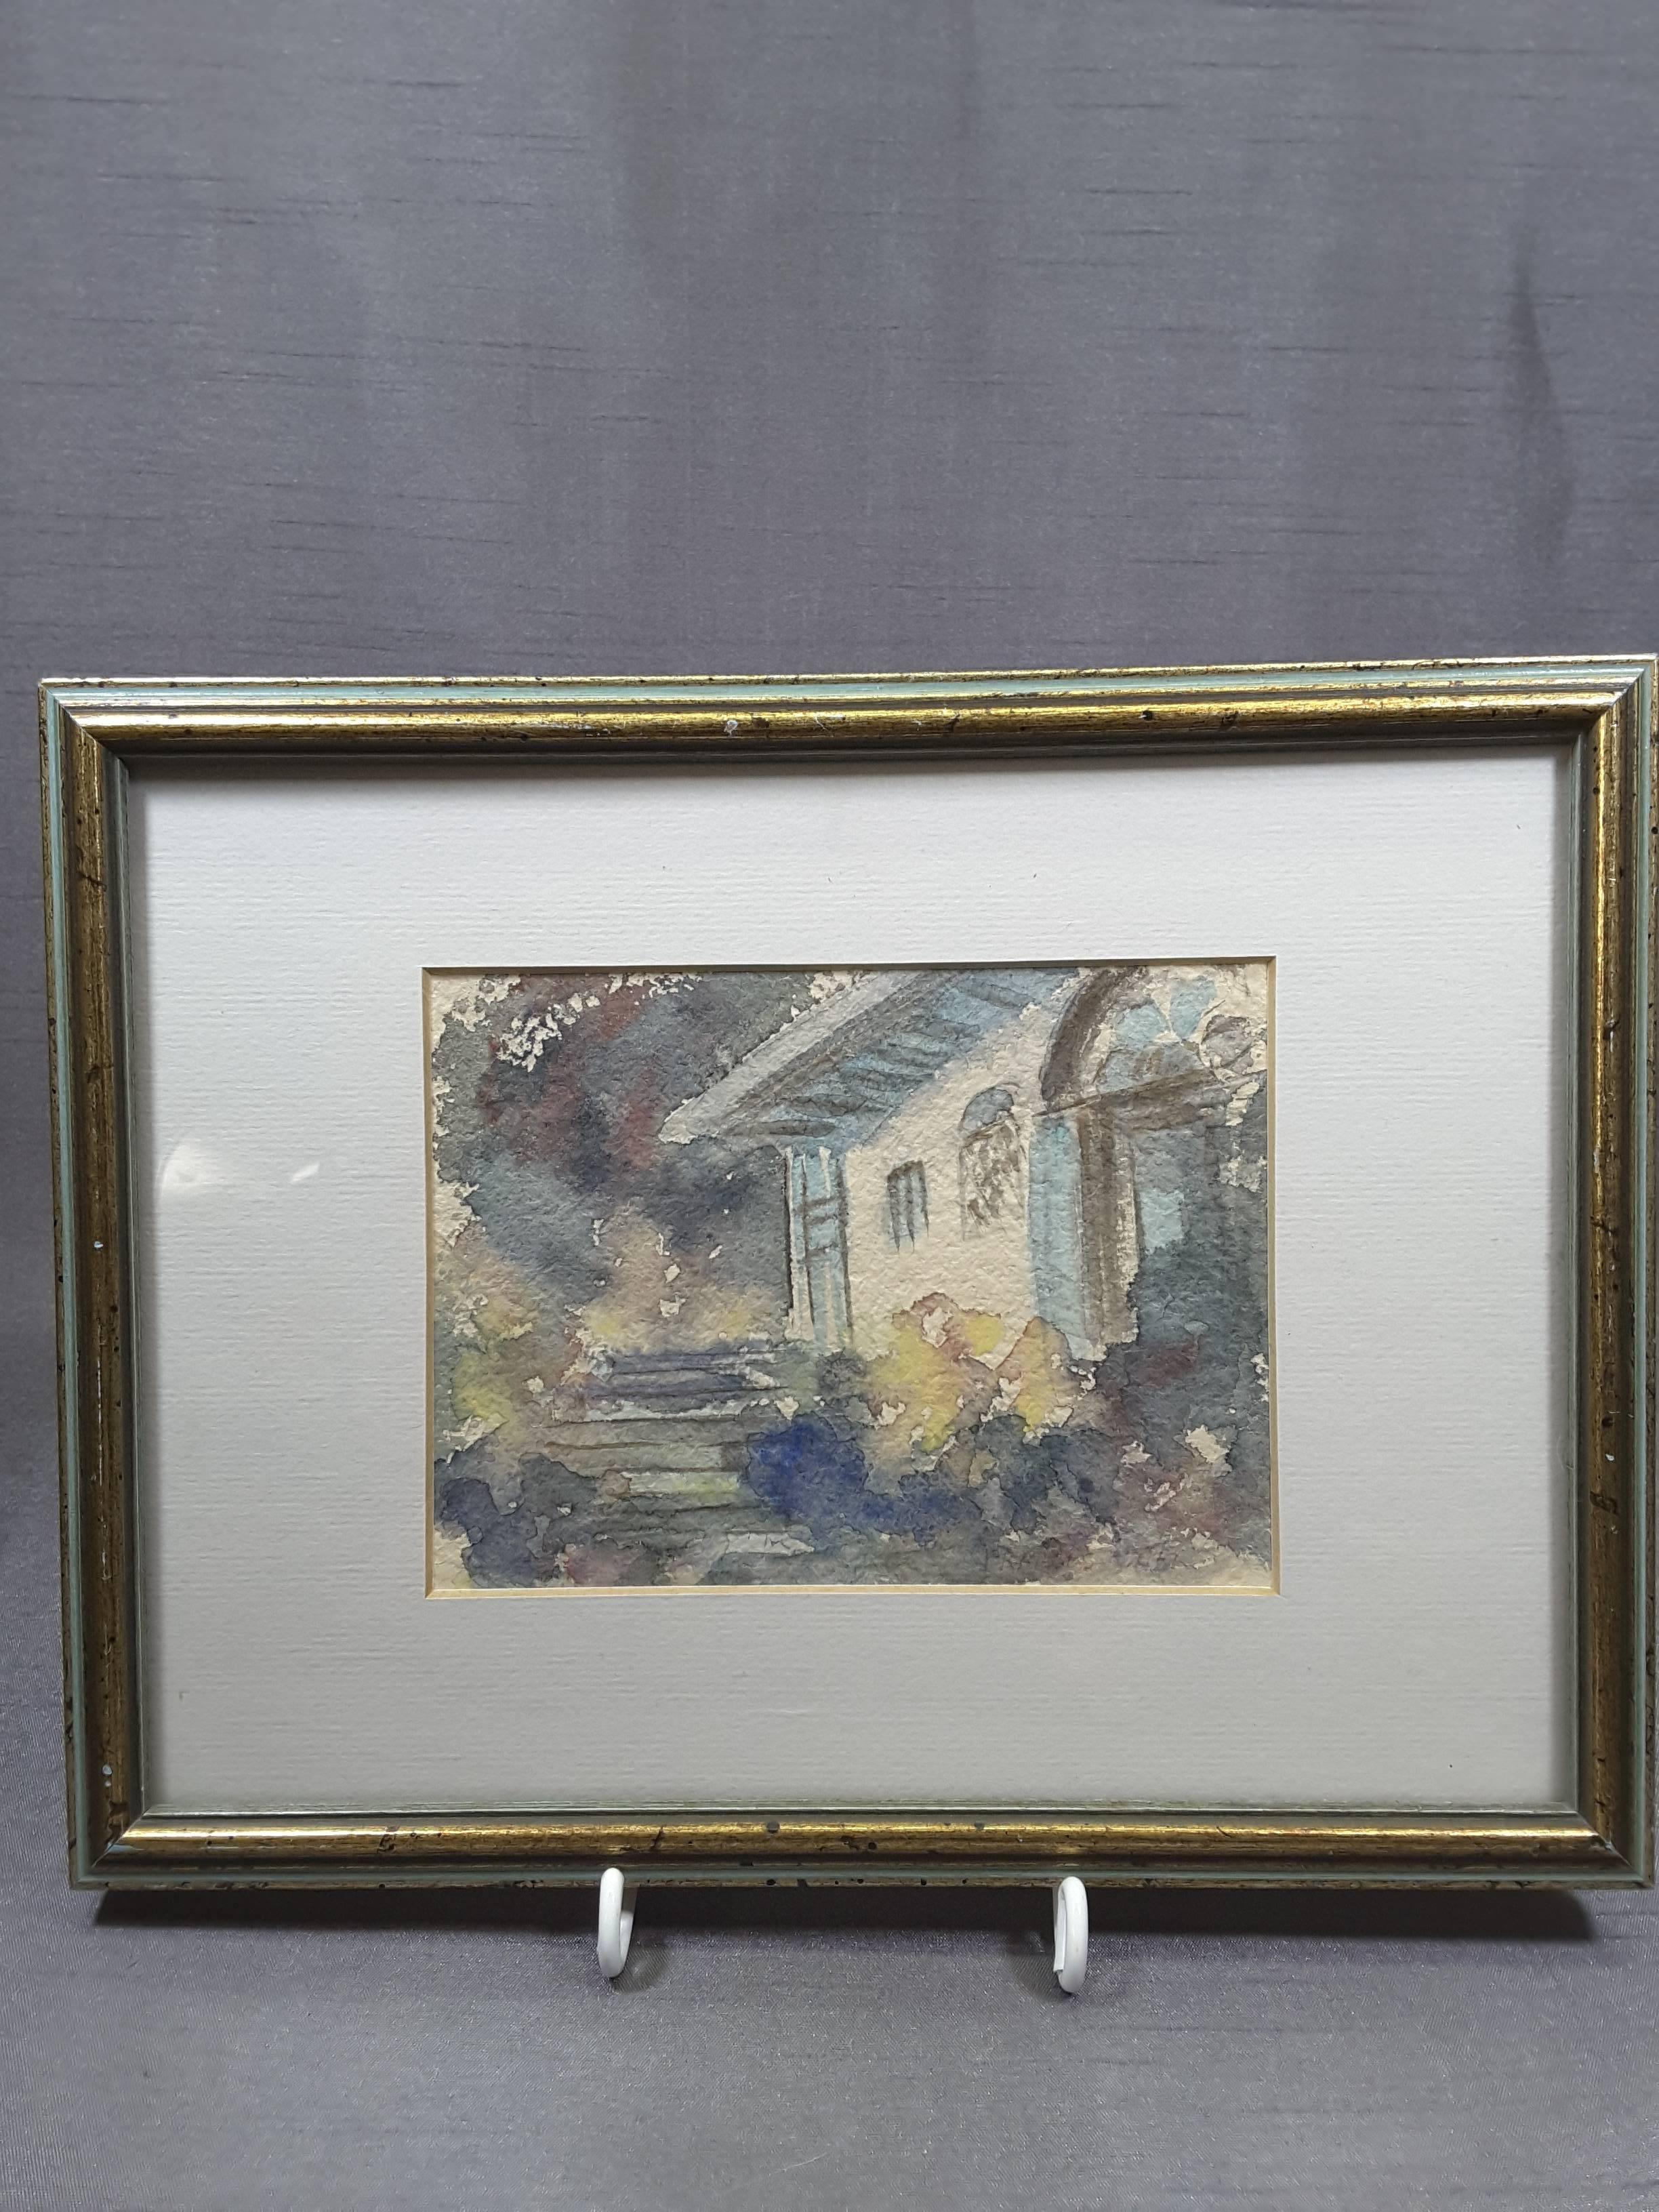 Francis Carr Watercolor, titled Doorway Portmeirion Wales, Neice of Emily Carr (Group of 7) Canadian famous artist group. The watercolor is of a Wales country home, mounted on acid free matting, with no foxing or moisture issues. The painting is in